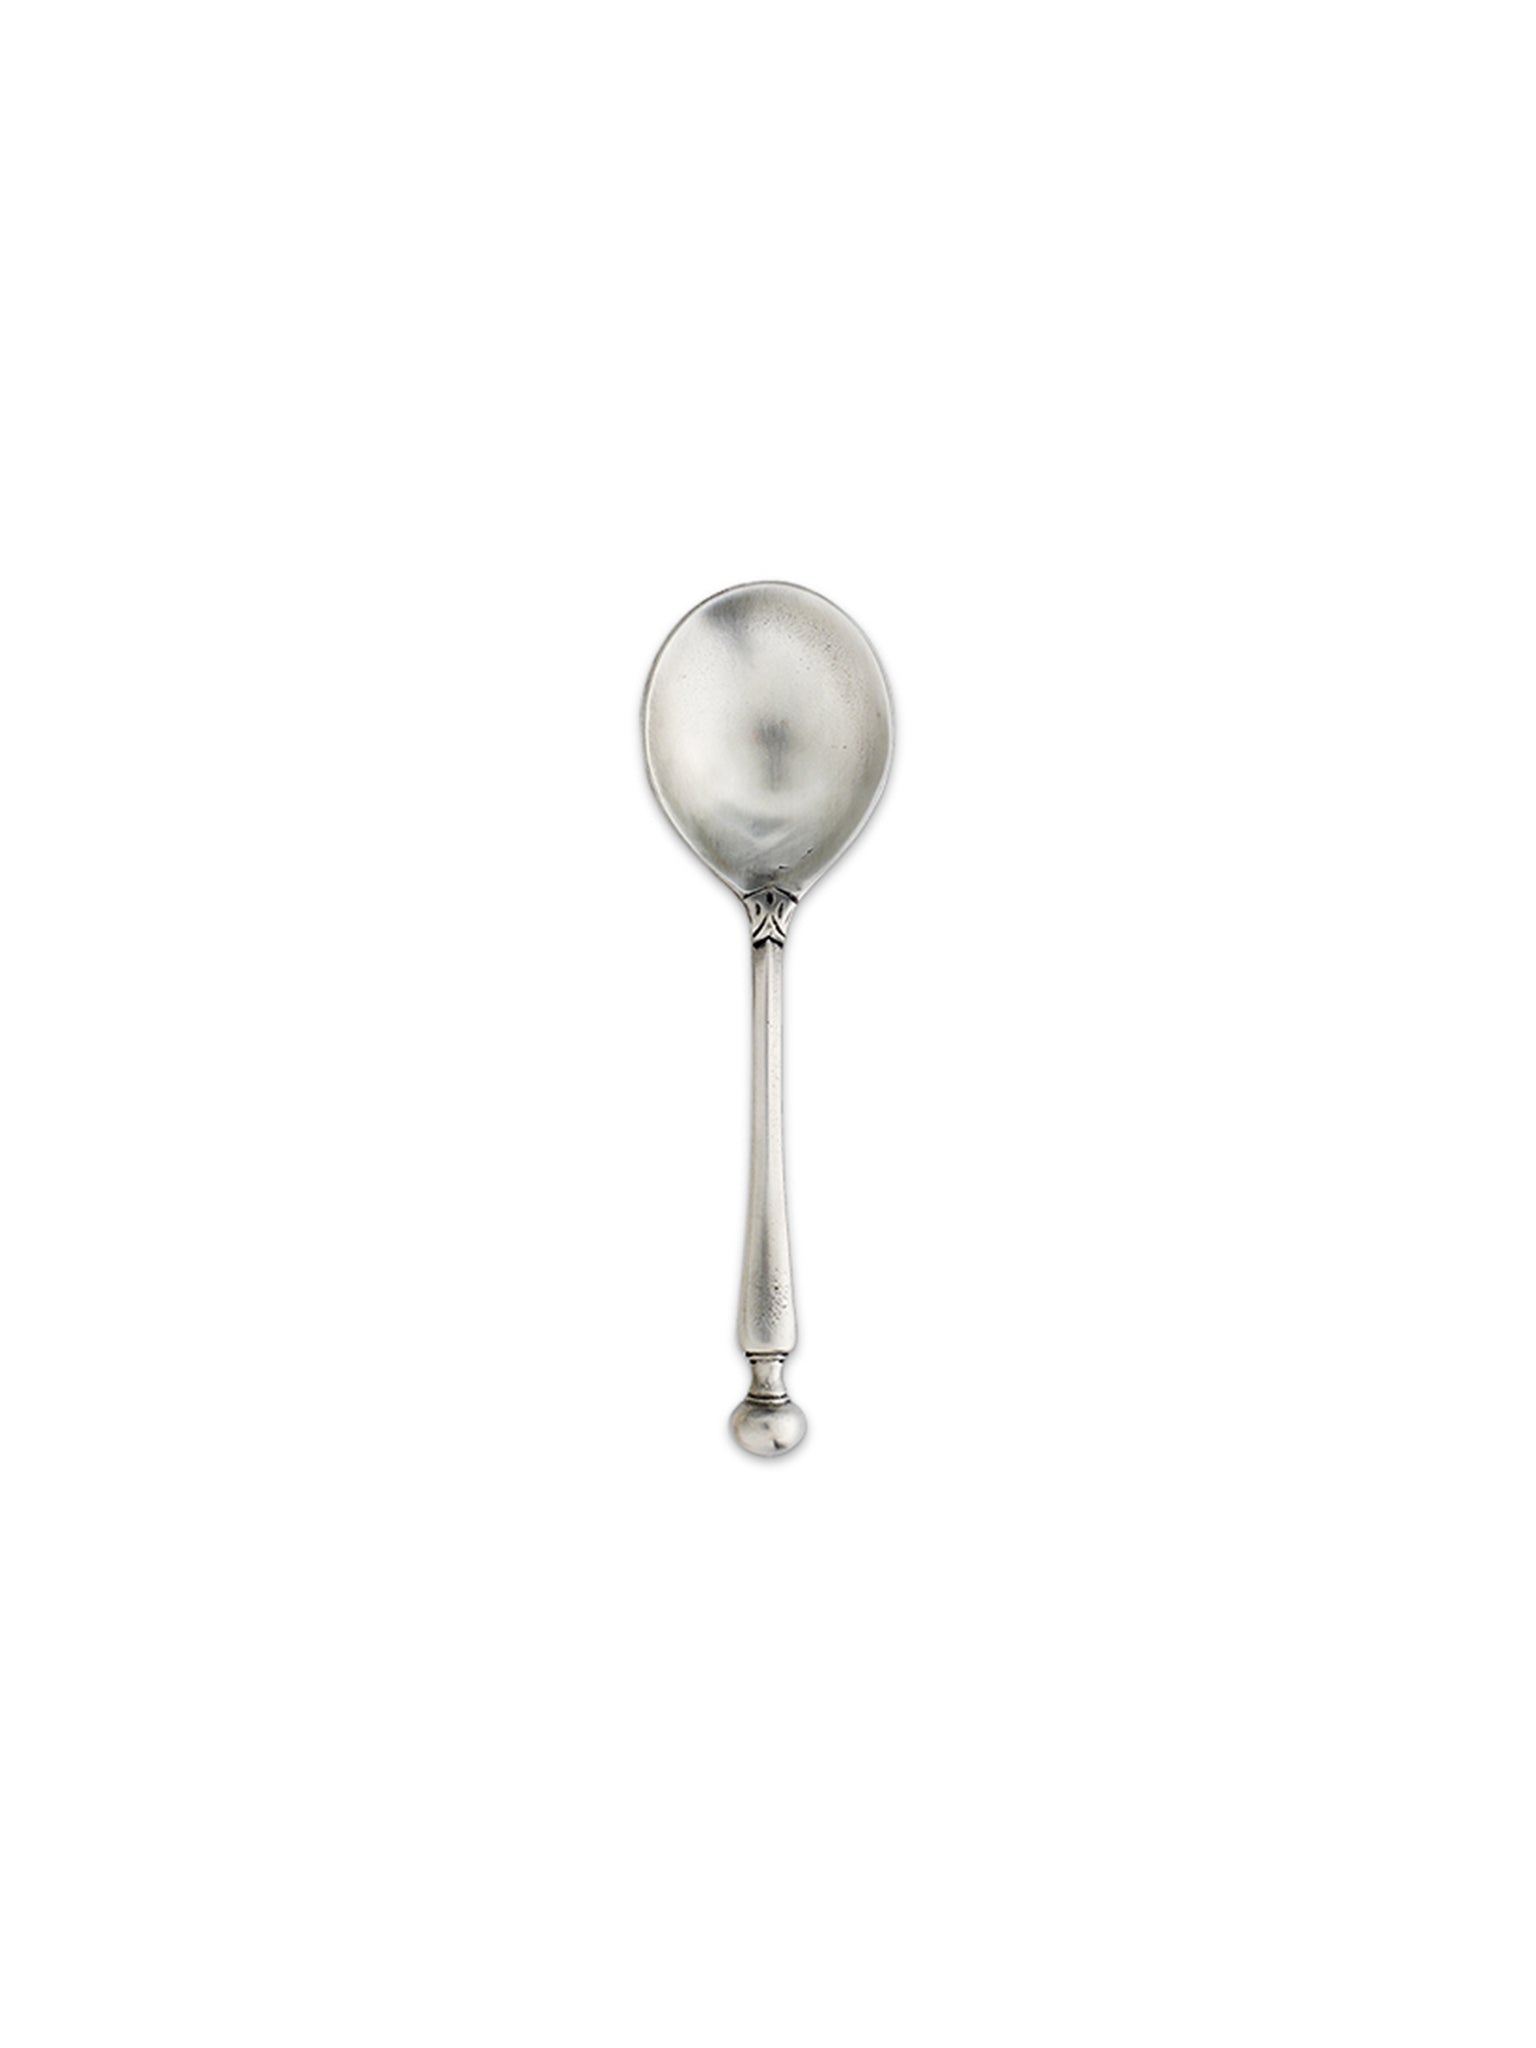 MATCH Pewter Long Taper Spoon Weston Table